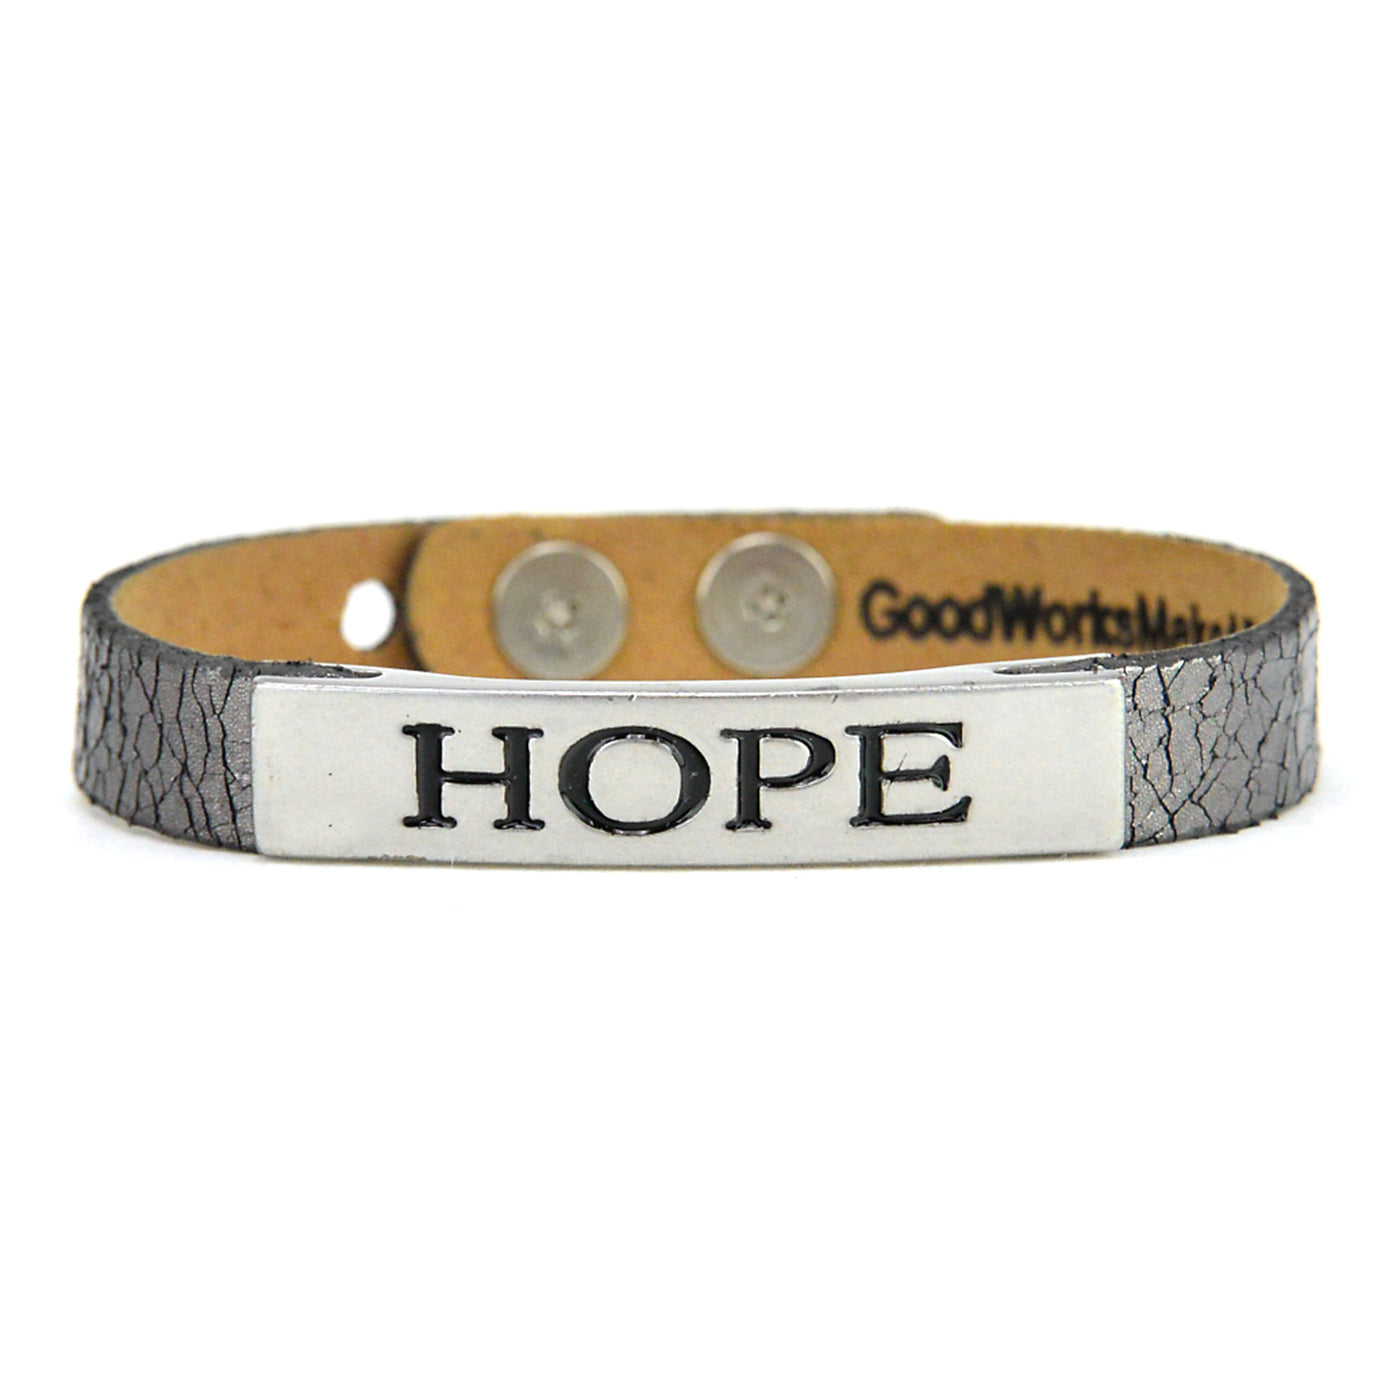 Life's Inspiration Bracelet-Good Work(s) Make A Difference® | Christian and Inspirational Jewelry Company in Vernon, California